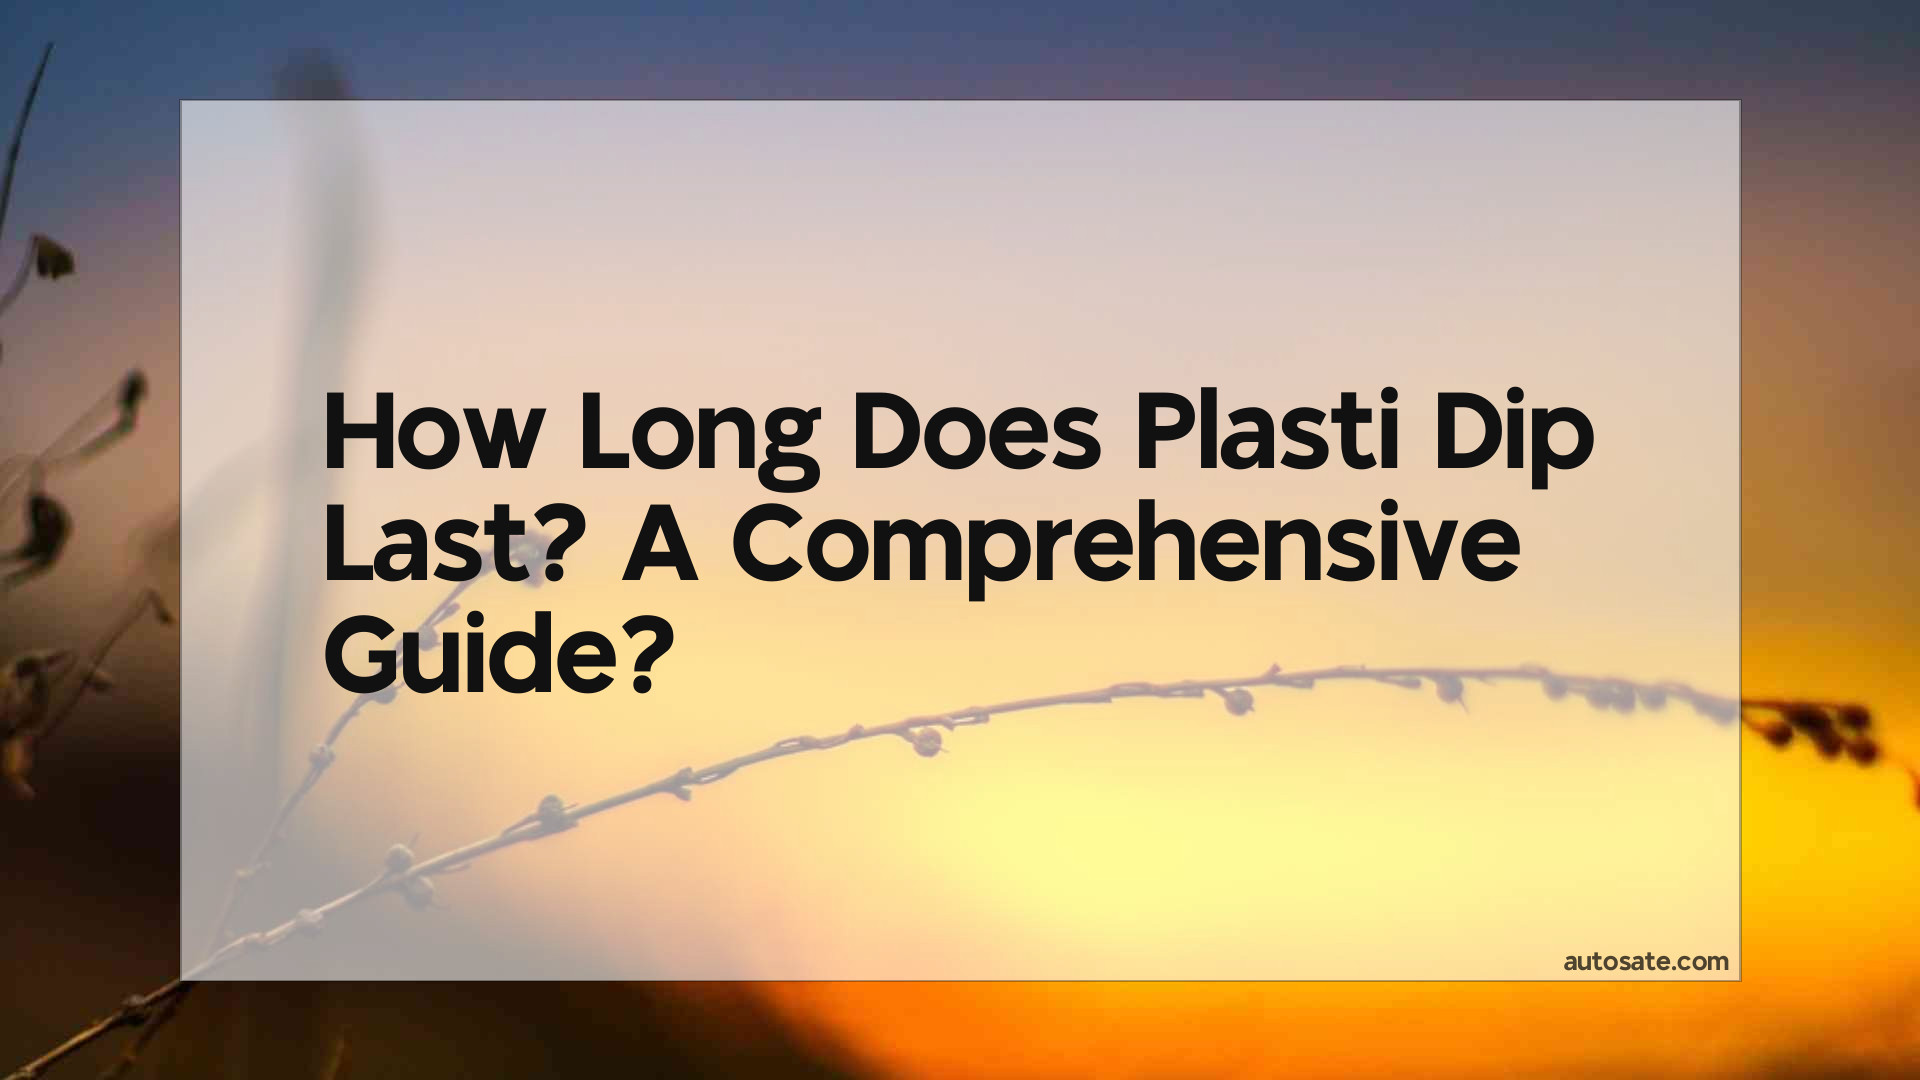 How Long Does Plasti Dip Last? A Comprehensive Guide